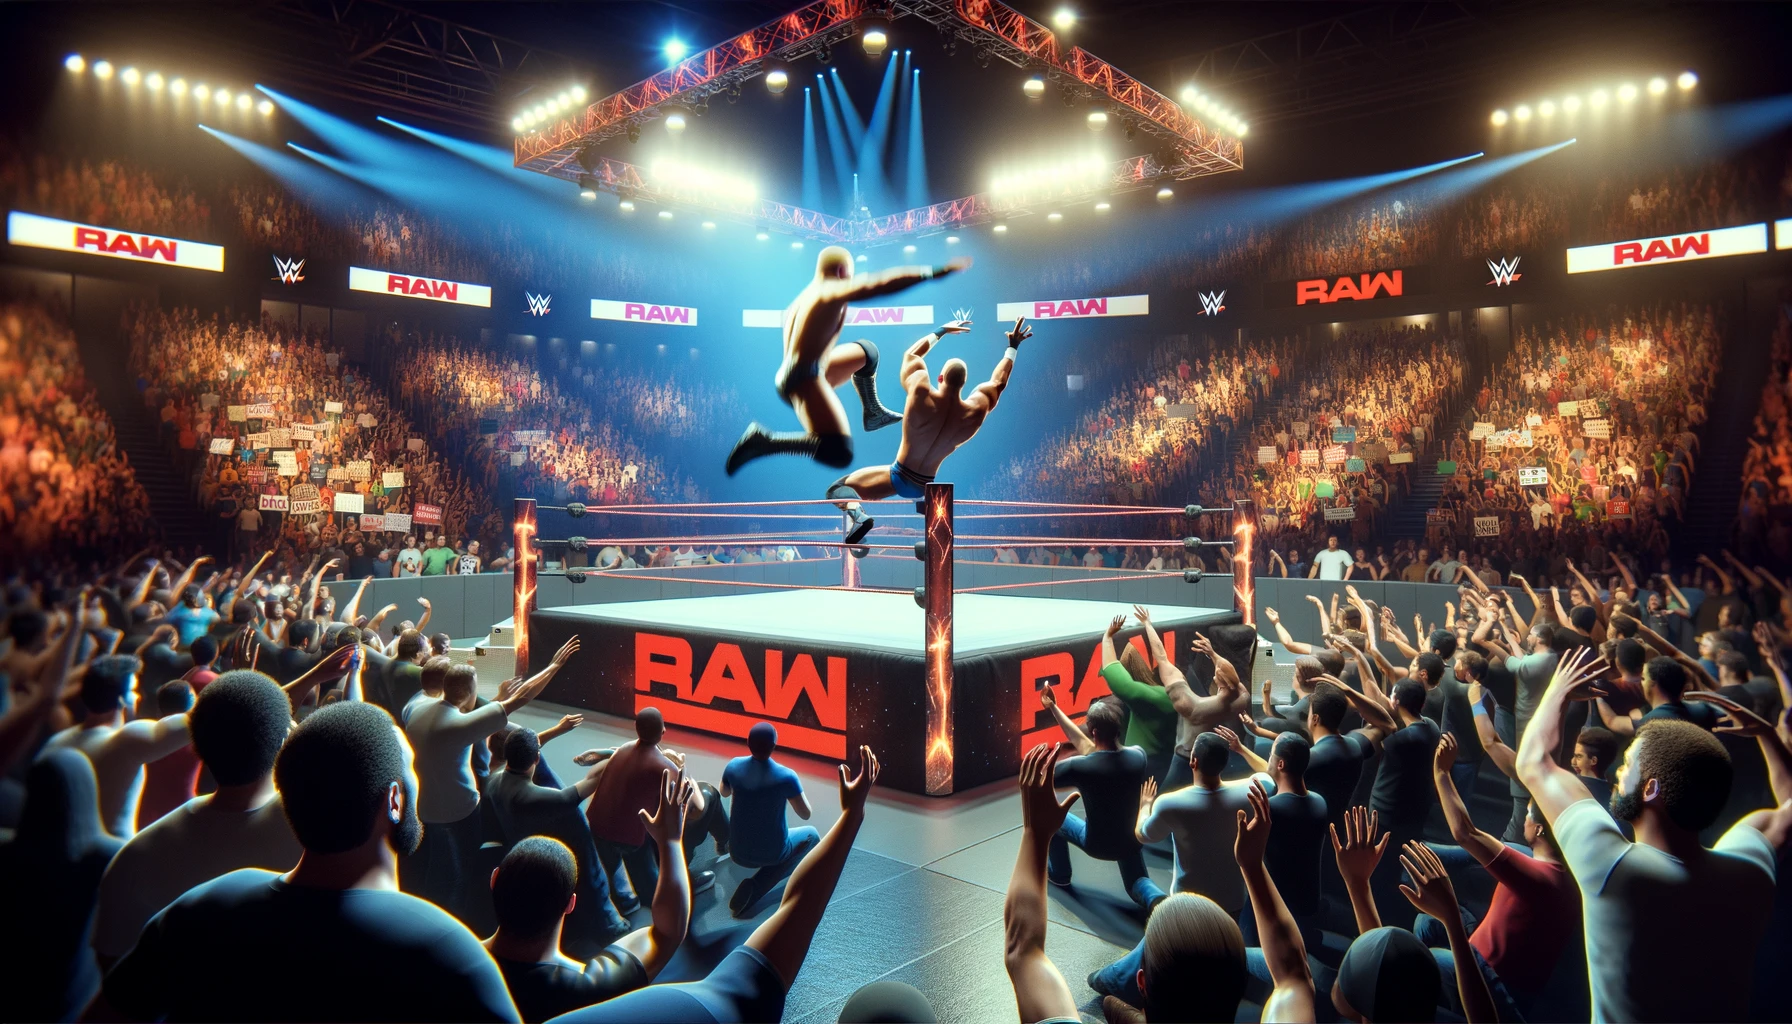 WWE Raw Episode 1785: A Thrilling Showcase of Talent and Drama